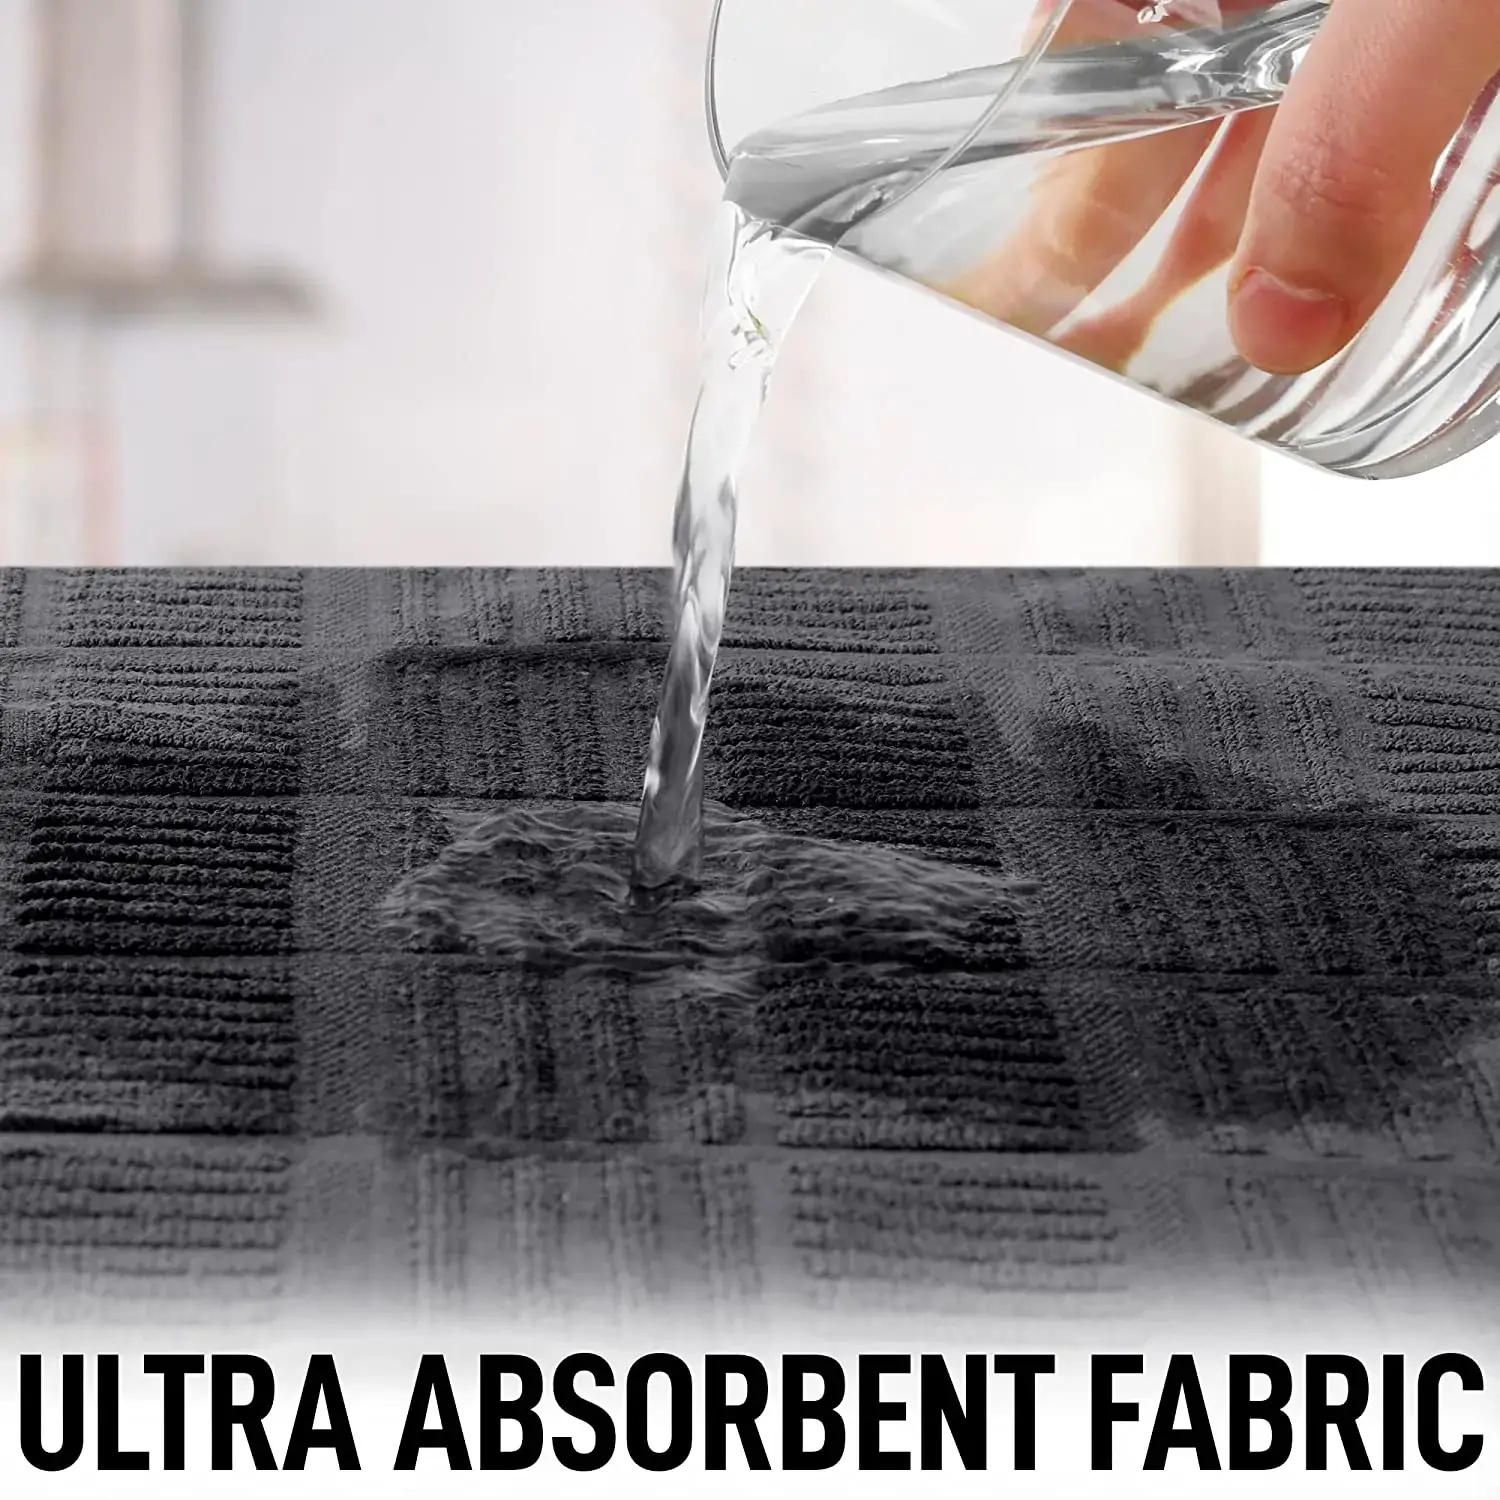 Absorbent Kitchen Towels Cotton